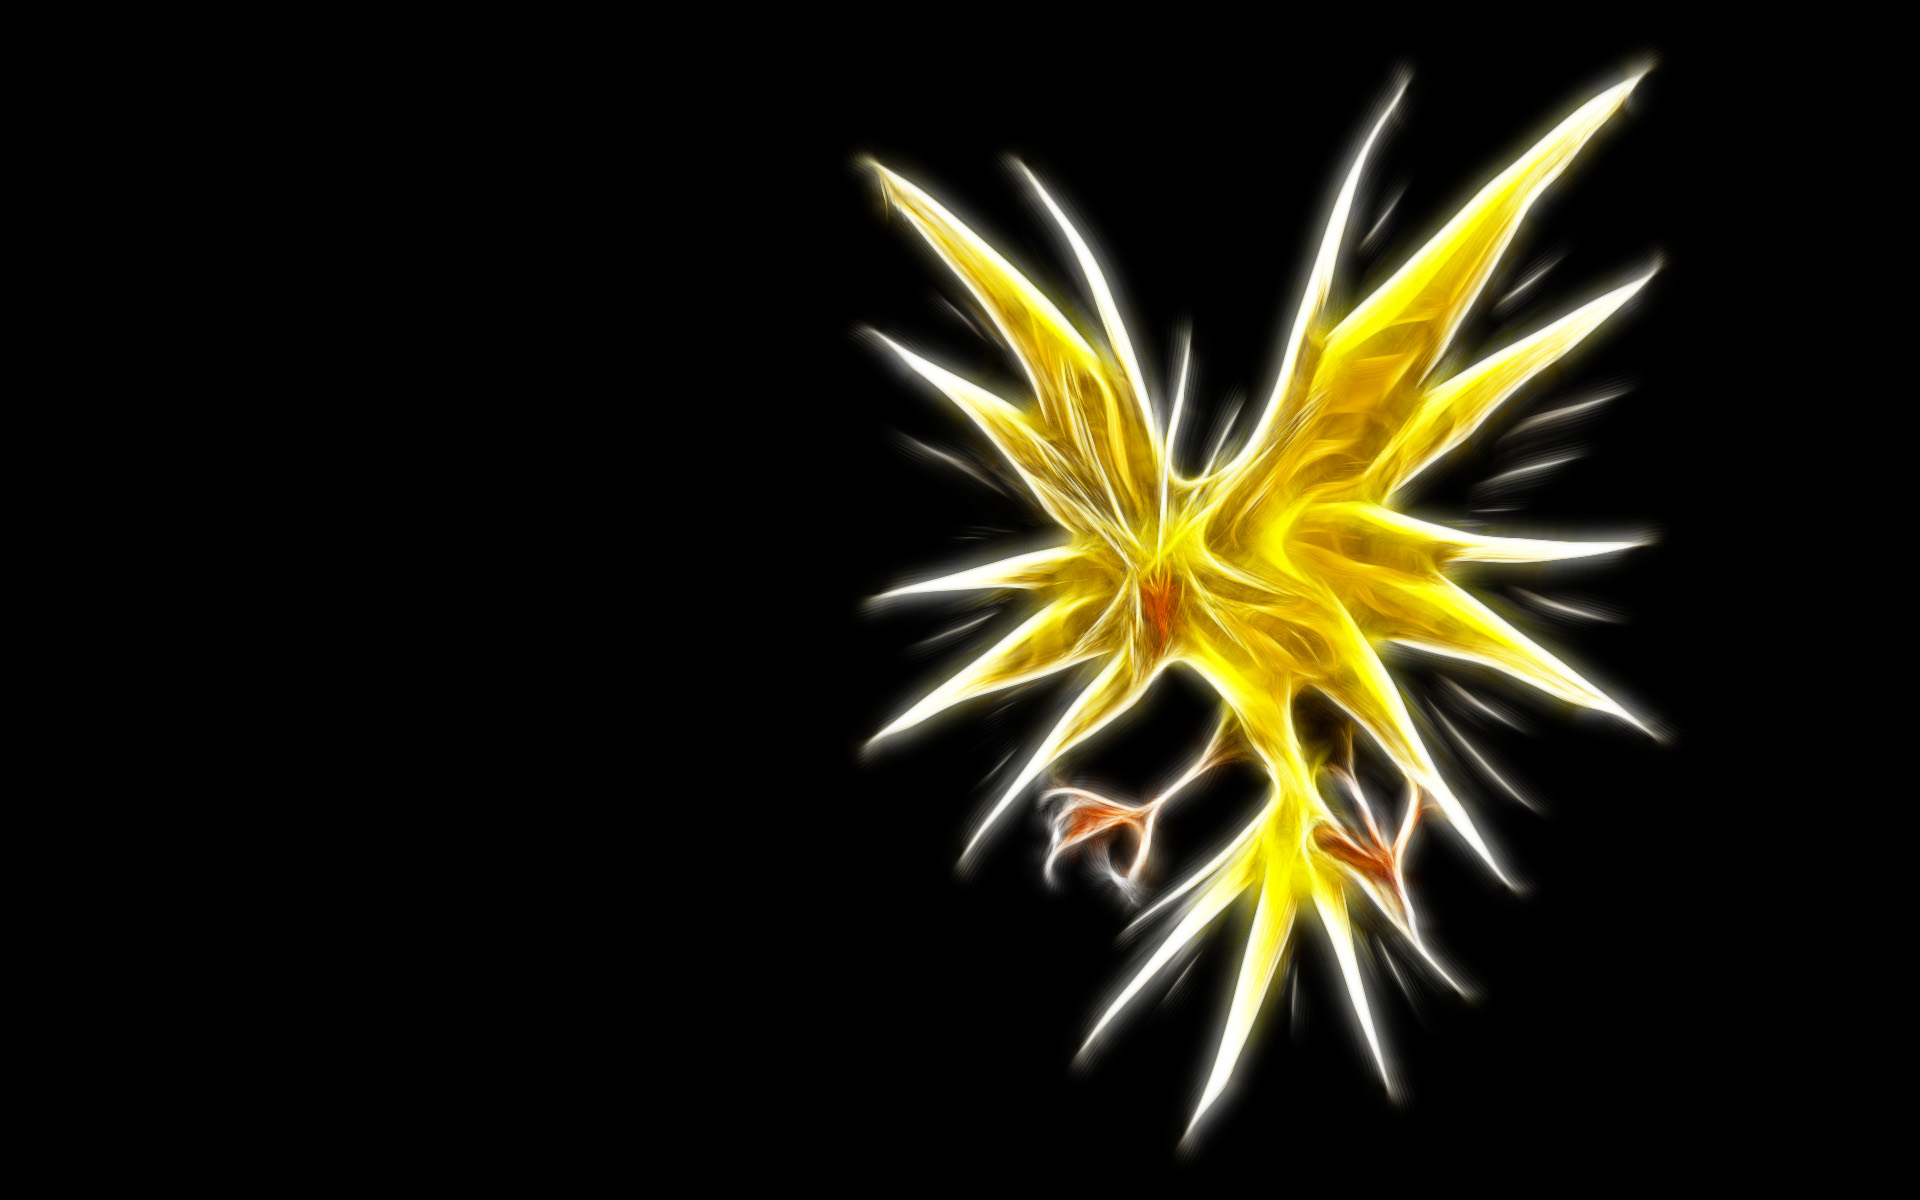 Zapdos (Pokémon) HD Wallpapers and Backgrounds. 